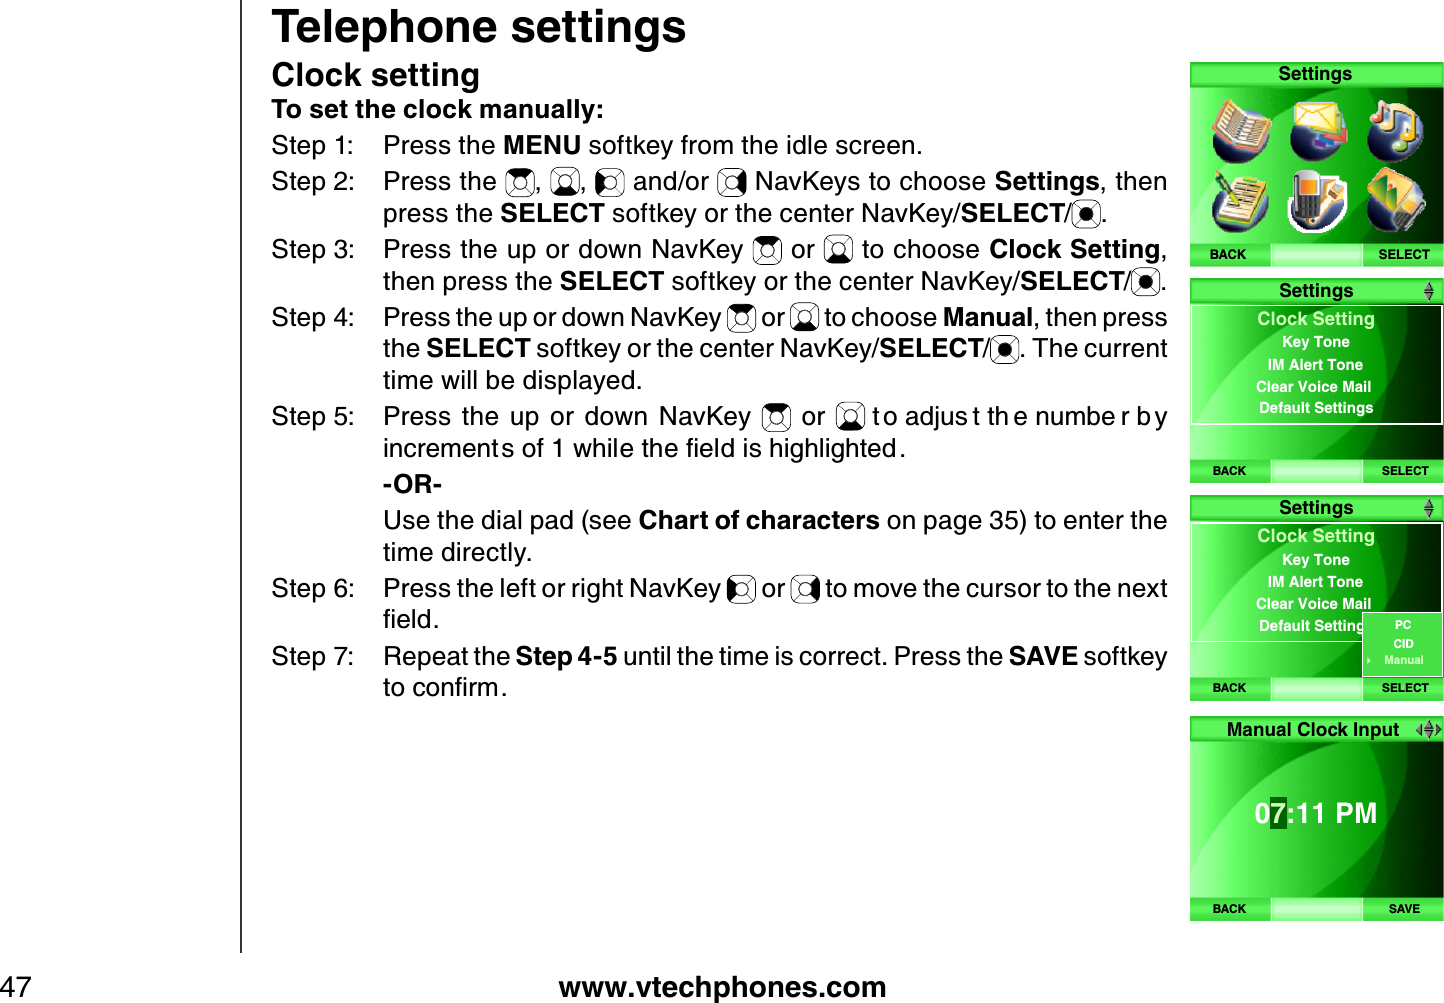 www.vtechphones.com47Telephone settingsClock settingTo set the clock manually:Step 1: Press the MENU softkey from the idle screen.Step 2: Press the  , ,  and/or   NavKeys to choose Settings, then press the SELECT softkey or the center NavKey/SELECT/.Step 3: Press the up or down NavKey   or   to choose Clock Setting,then press the SELECT softkey or the center NavKey/SELECT/.Step 4: Press the up or down NavKey   or   to choose Manual, then press the SELECT softkey or the center NavKey/SELECT/. The current time will be displayed.Step 5: Press  the  up  or  down  NavKey    or  V QCFLWU VVJ GPWODG TD [KPETGOGPVUQHYJKNGVJGſGNFKUJKIJNKIJVGF    -OR-    U se the dial pad (see Chart of characters on page 35) to enter the time directly.Step 6: Press the left or right NavKey   or   to move the cursor to the nex t ſGNFStep 7: R epeat the Step 4 -5 until the time is correct. Press the SA VE softkey VQEQPſTOSELECTSettingsBACKBACK SELECTClock SettingIM Alert ToneClear Voice Mail Default SettingsKey ToneSettingsBACK SELECTClock SettingIM Alert ToneClear Voice Mail Default SettingsKey ToneSettingsCIDPCManualBACK SAVE07:11 PM Manual Clock Input 